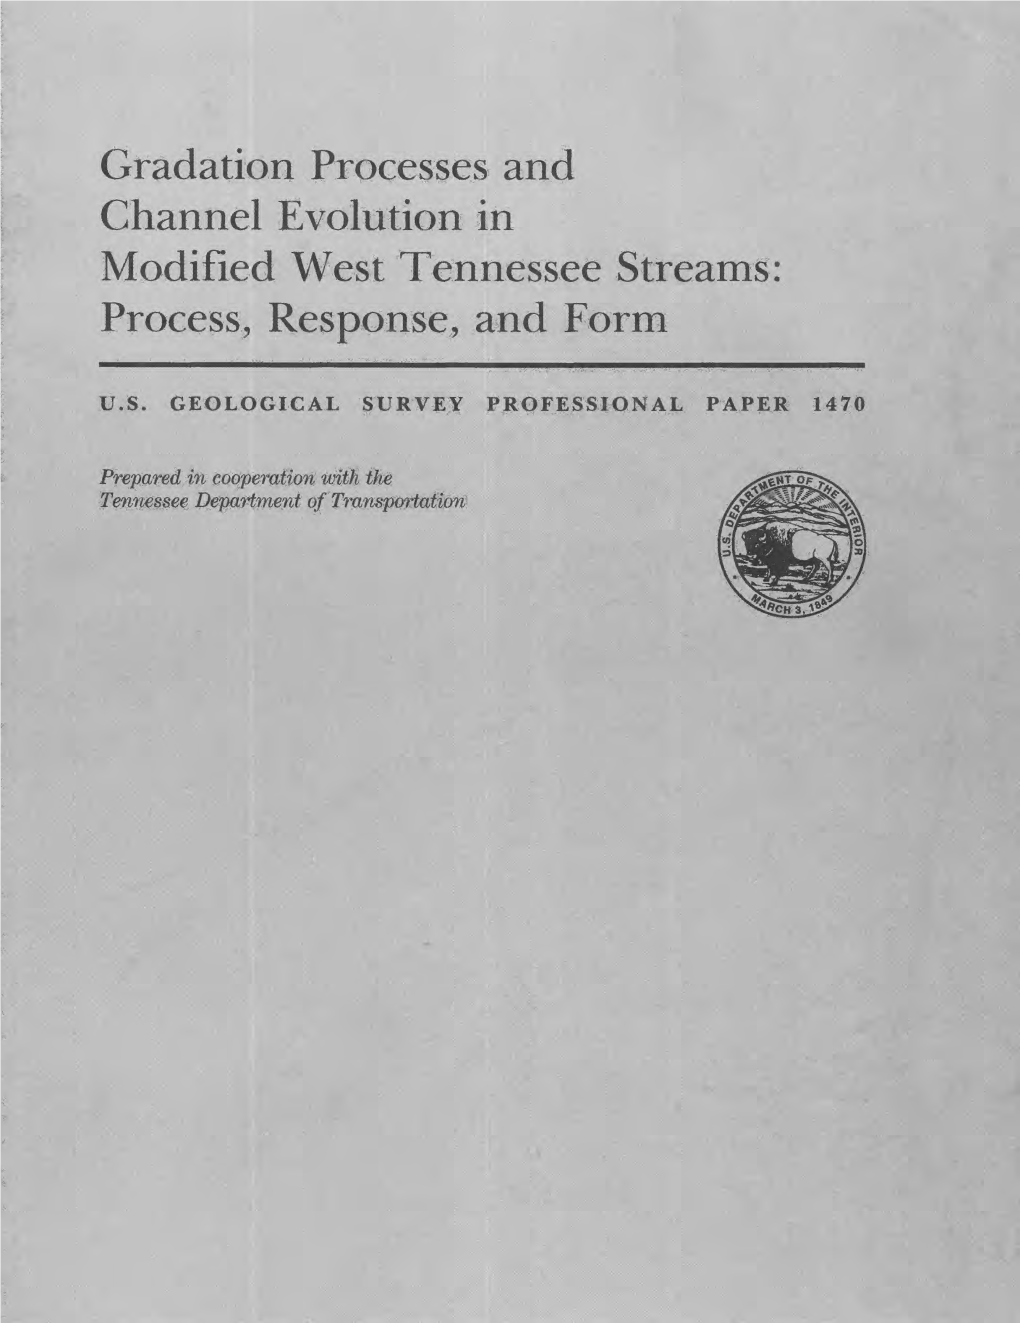 Gradation Processes and Channel Evolution in Modified West Tennessee Process, Response, and Form